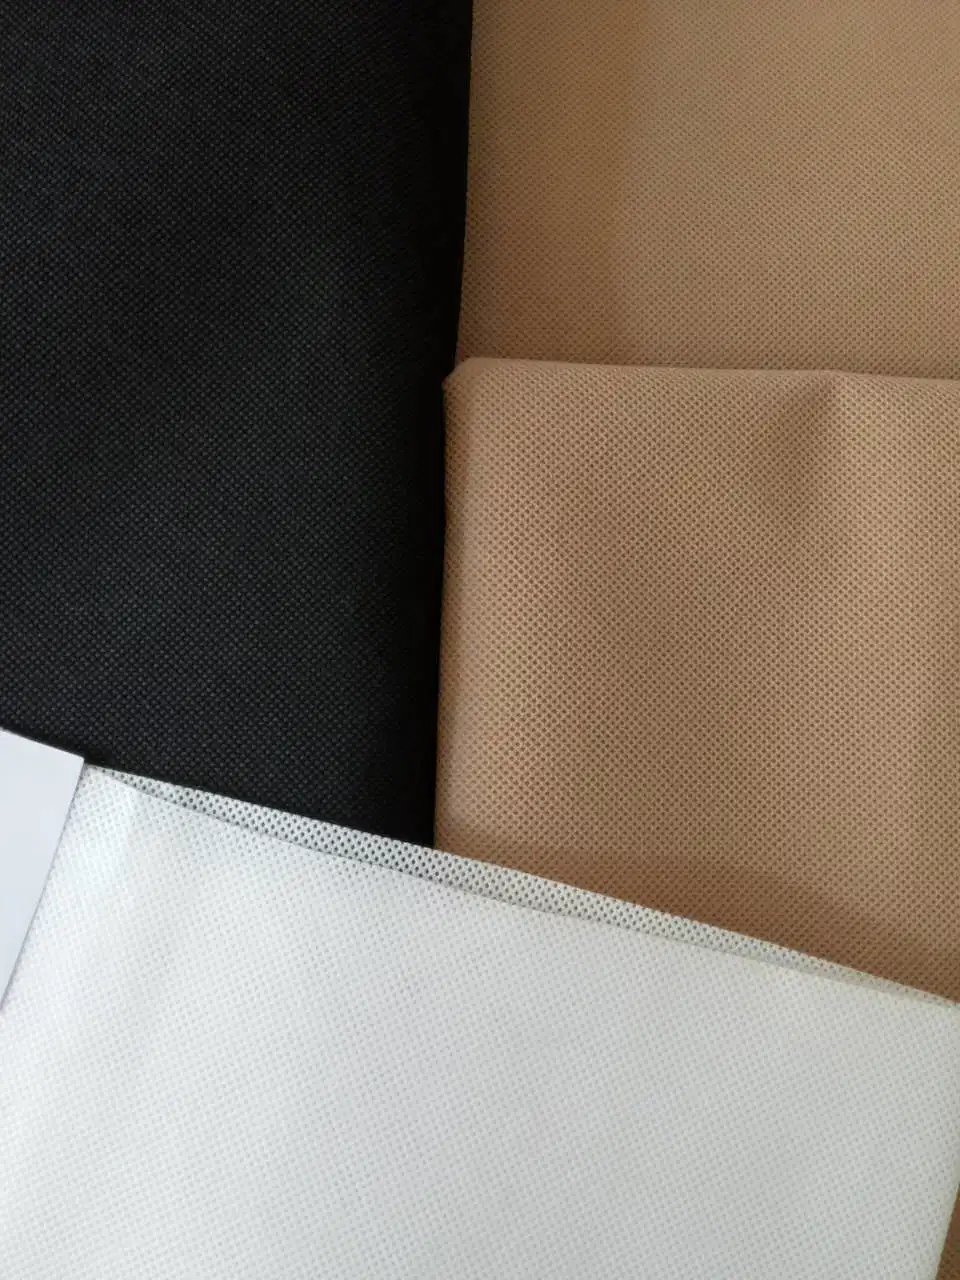 Ss/SMS/SMMS Meltblown / PP Spunbond /Spunlace Filter Fabric Geotextile Fabric Polypropylene /Nonwoven Fabric for Medical Face Masks and Disposable Coverall